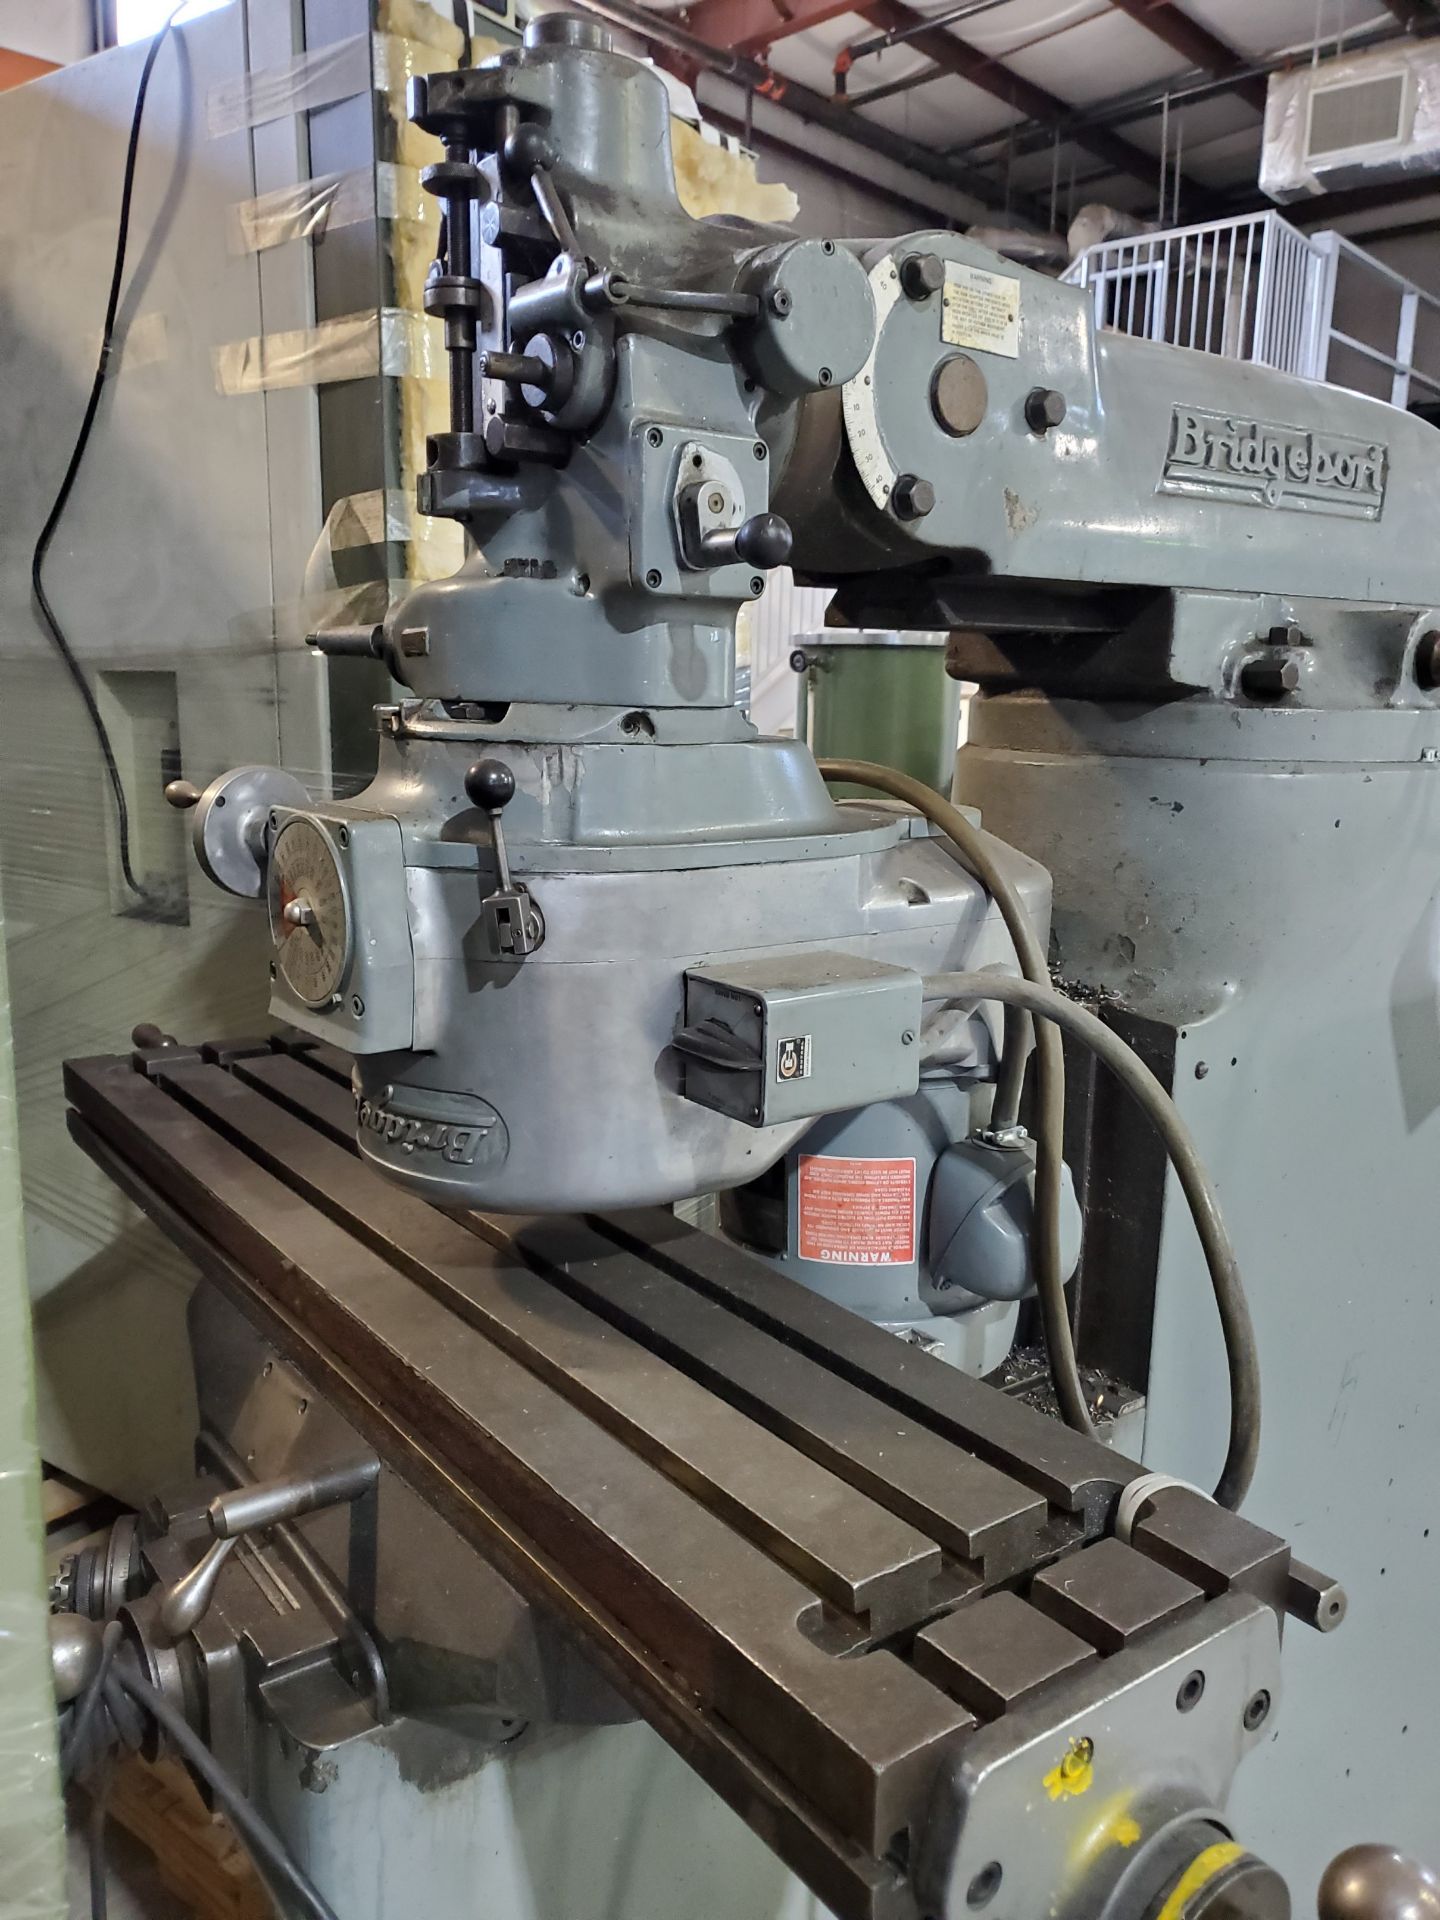 BRIDGEPORT VERTICAL MILLING MACHINE, 1.5-HP, 42'' X 9'' TABLE WITH POWER SERVO DRIVE, (HEAD TURNED F - Image 4 of 6